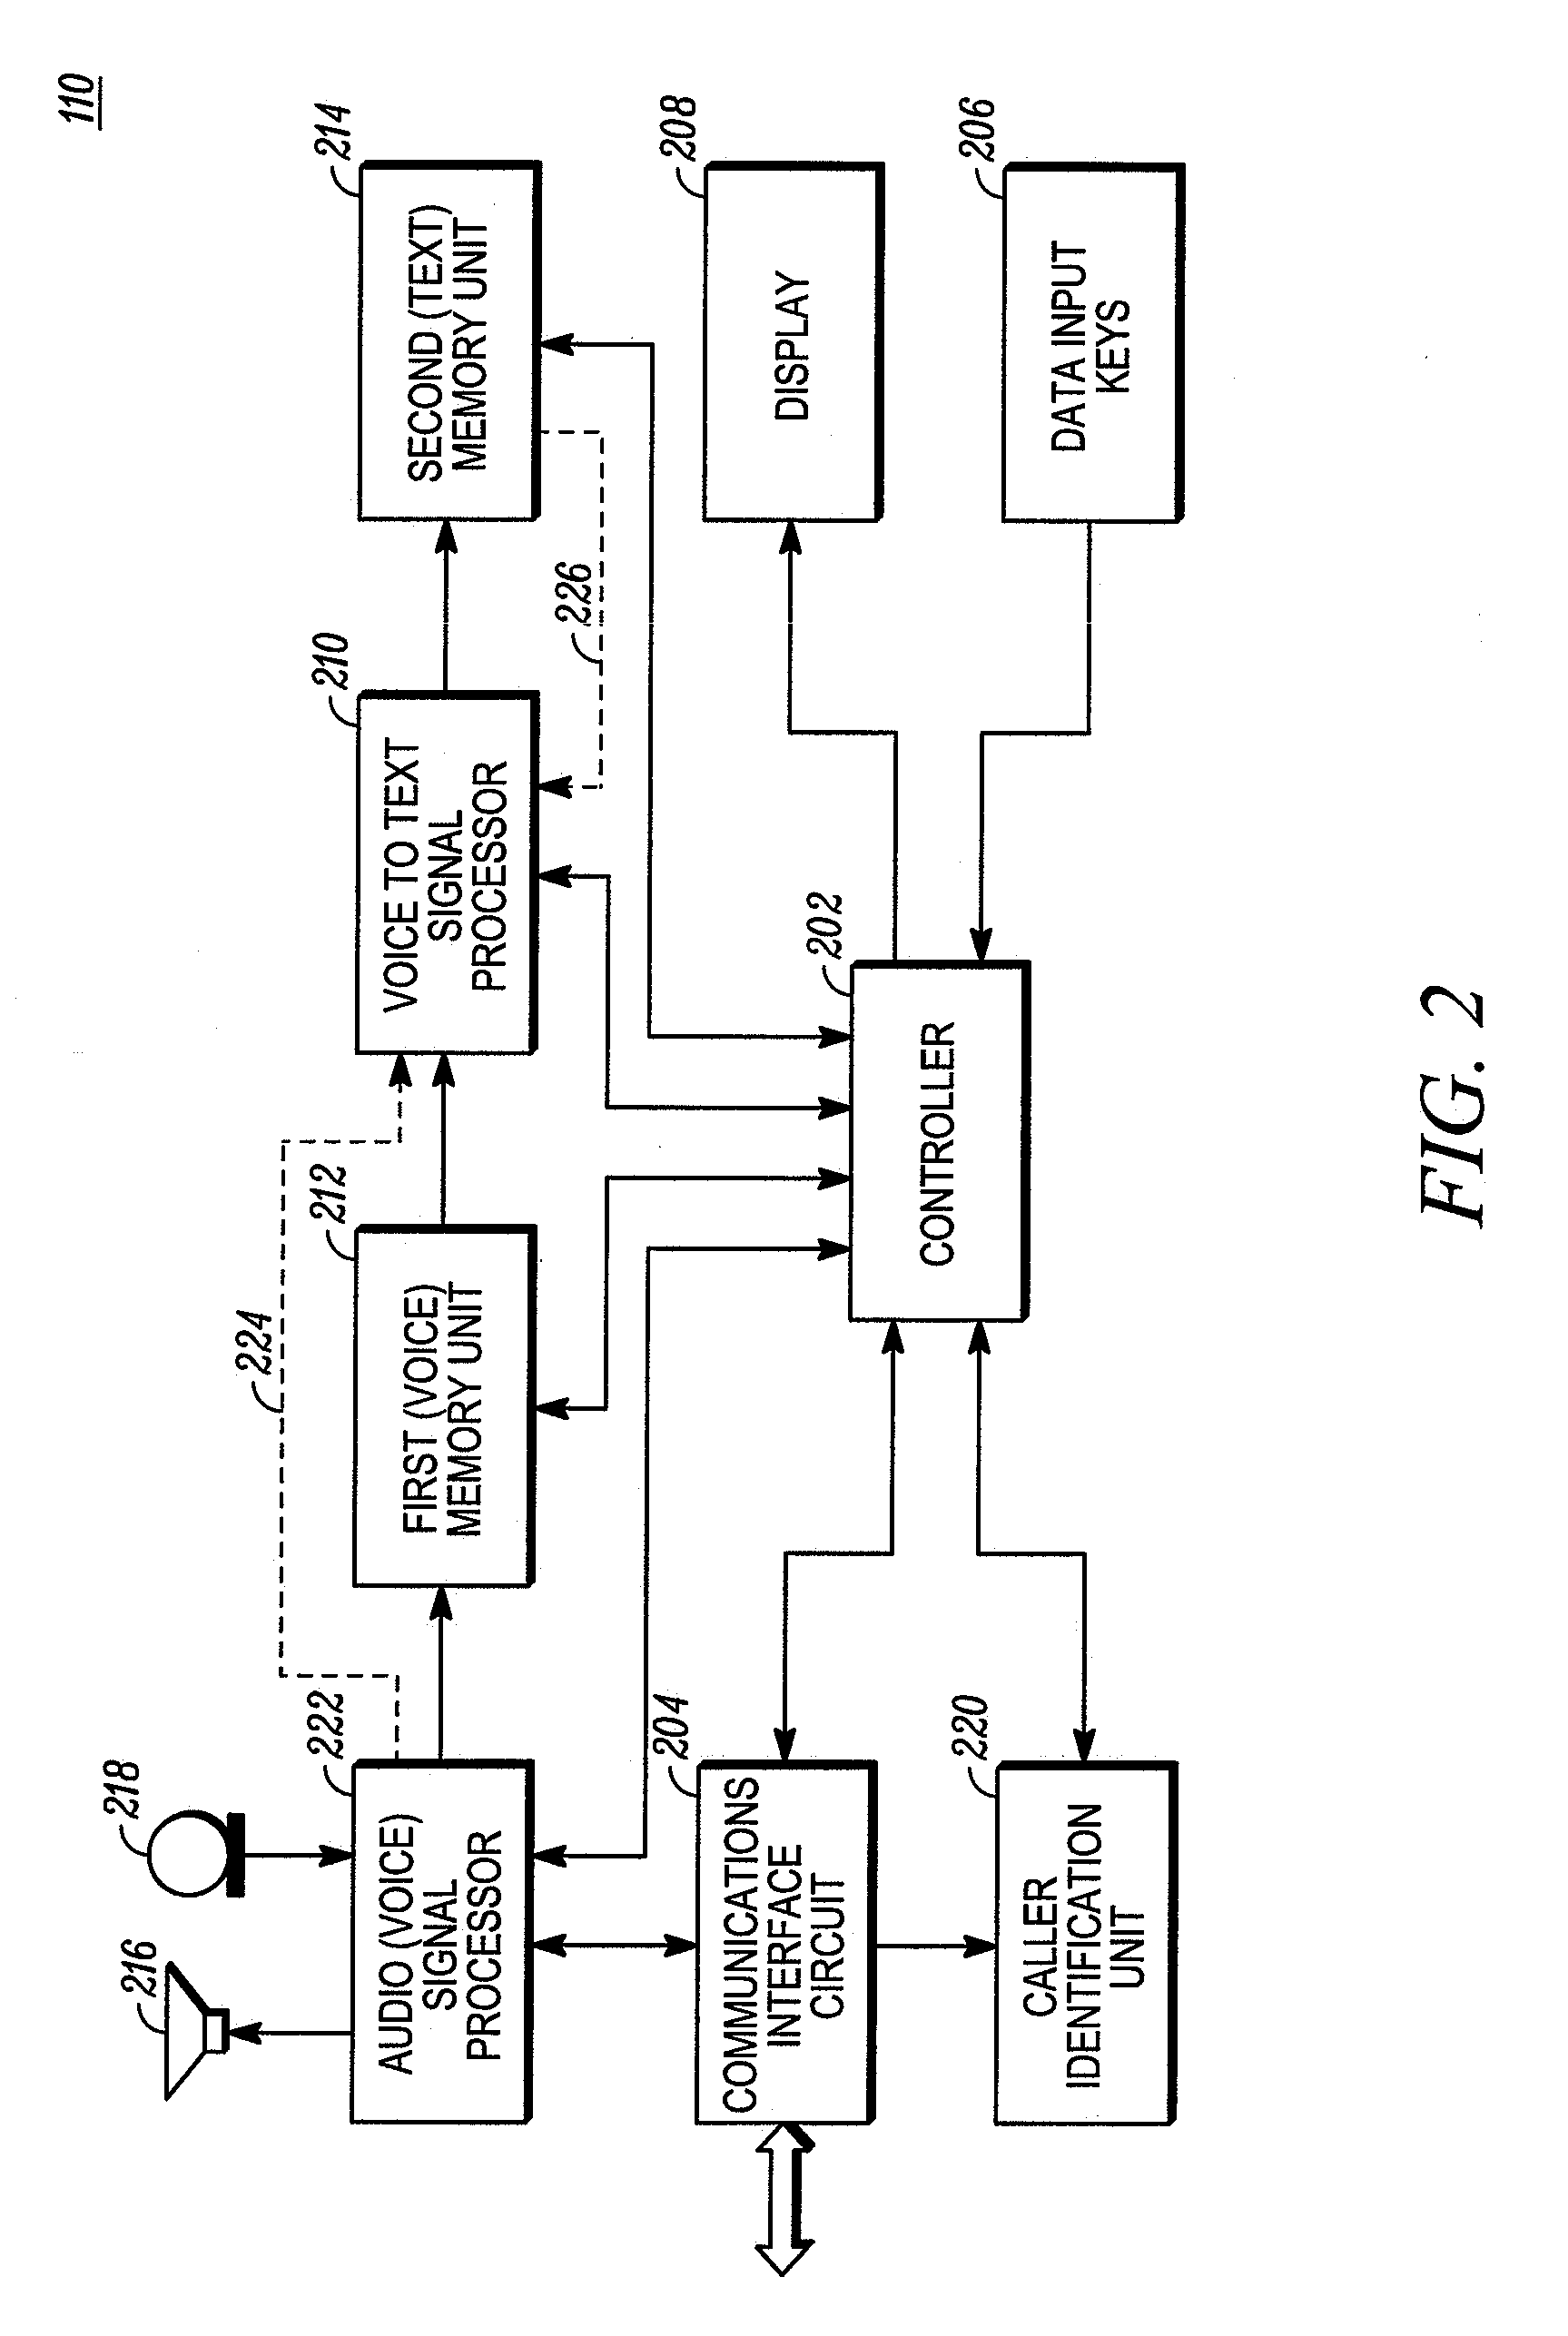 Method and apparatus for converting a voice signal received from a remote telephone to a text signal